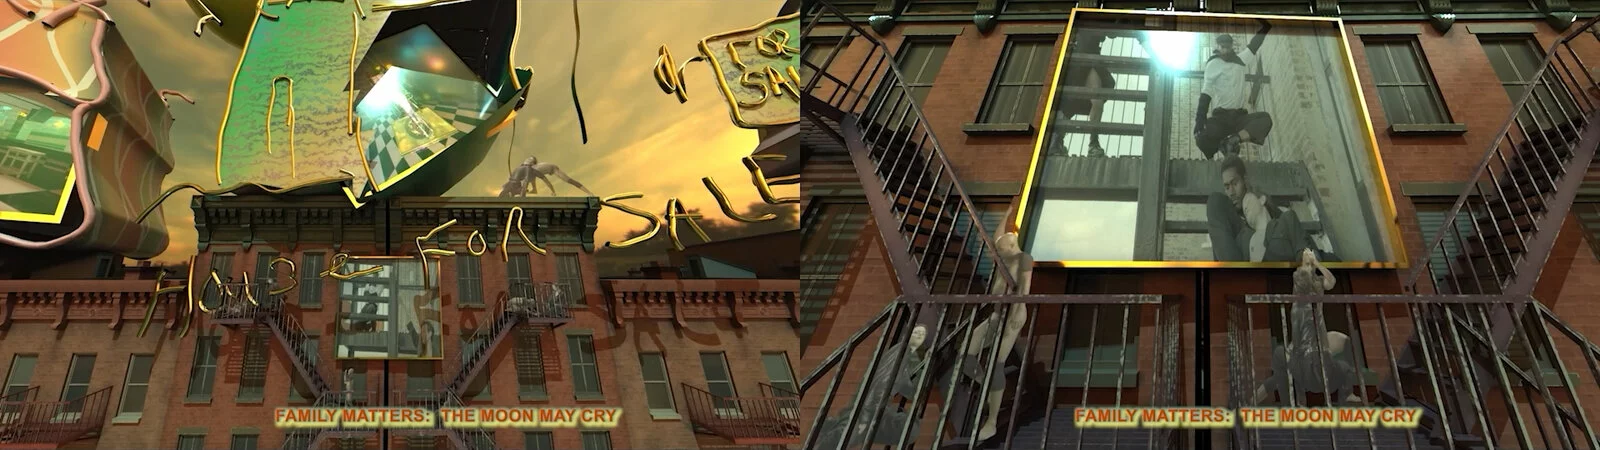 Two still images from color video and 3D animation of a brown building with dark brown stairs.